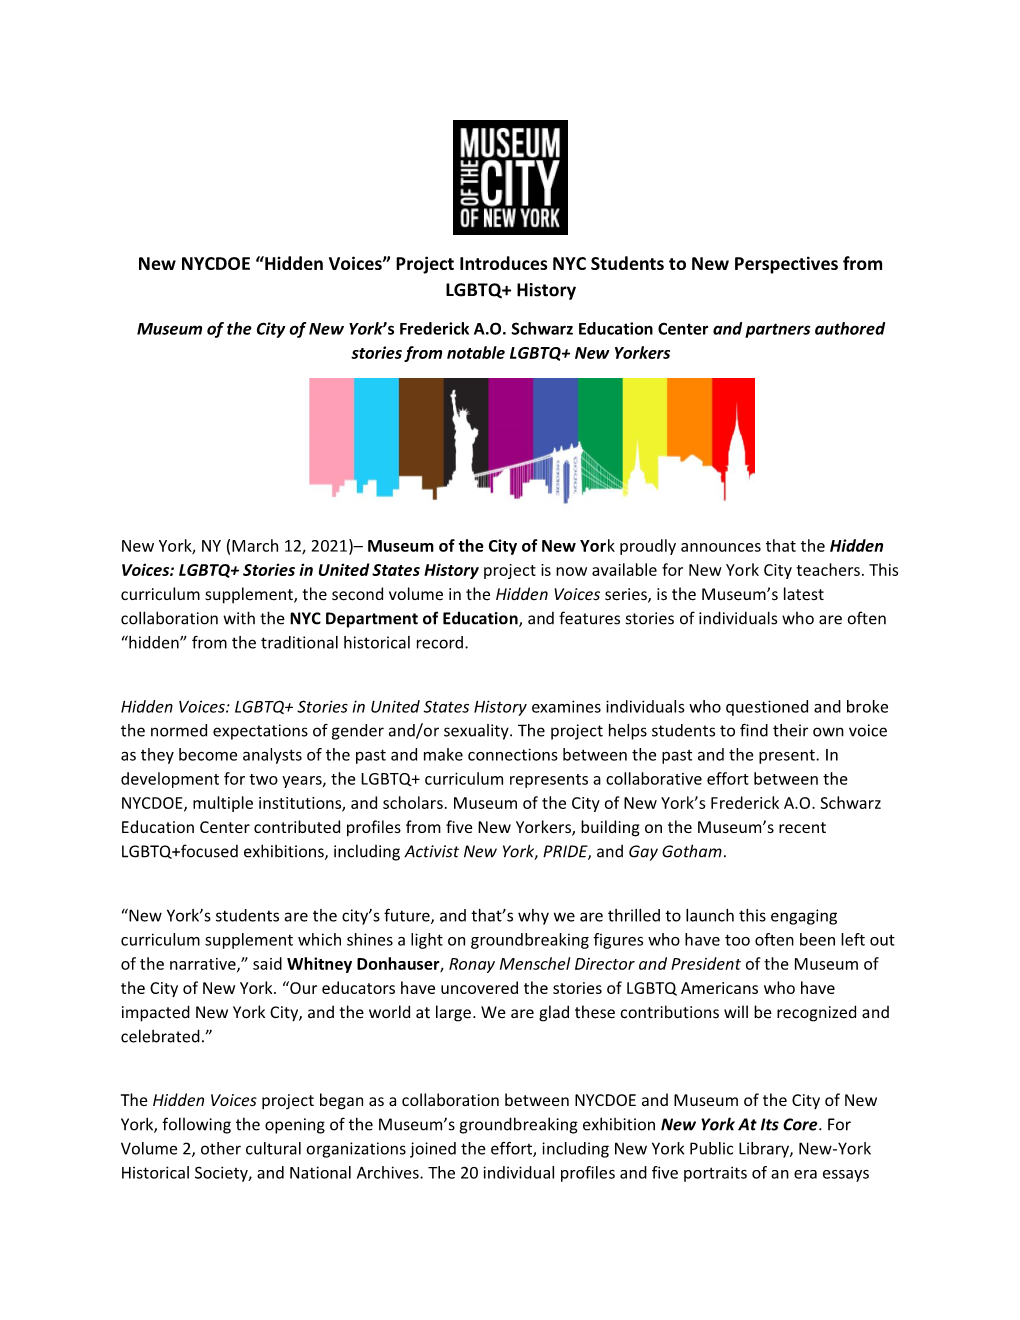 Hidden Voices” Project Introduces NYC Students to New Perspectives from LGBTQ+ History